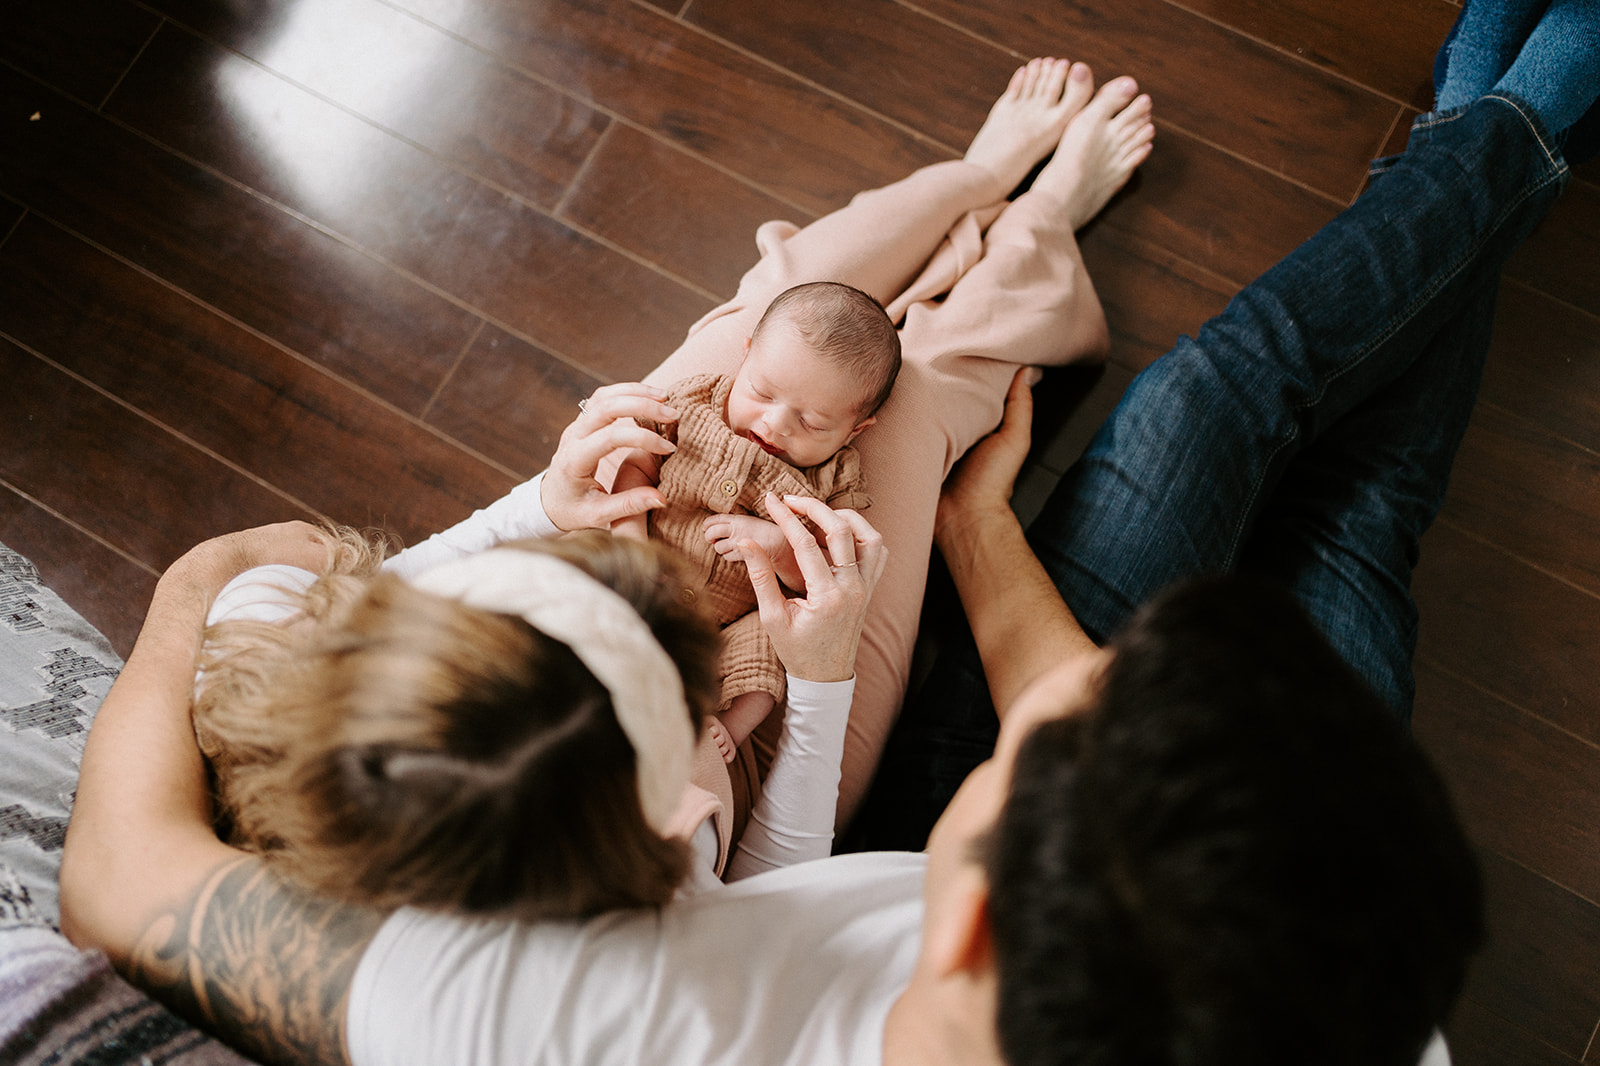 Over-head indoor family newborn session while both parents look at newborn